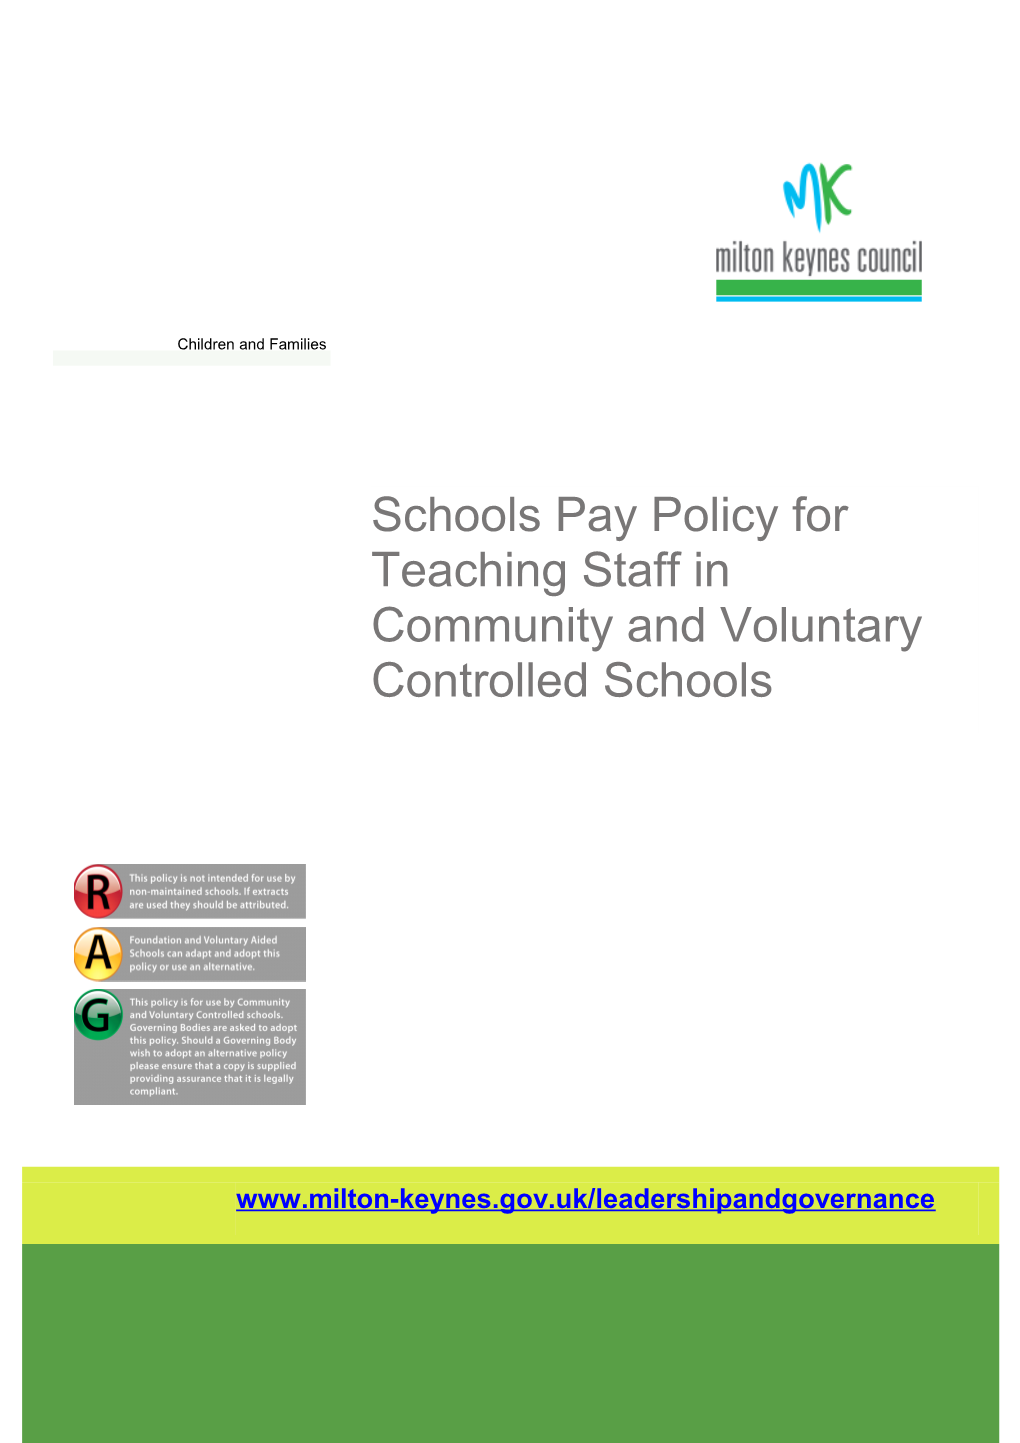 Information Sheet for the School Teachers Pay Policy 2016